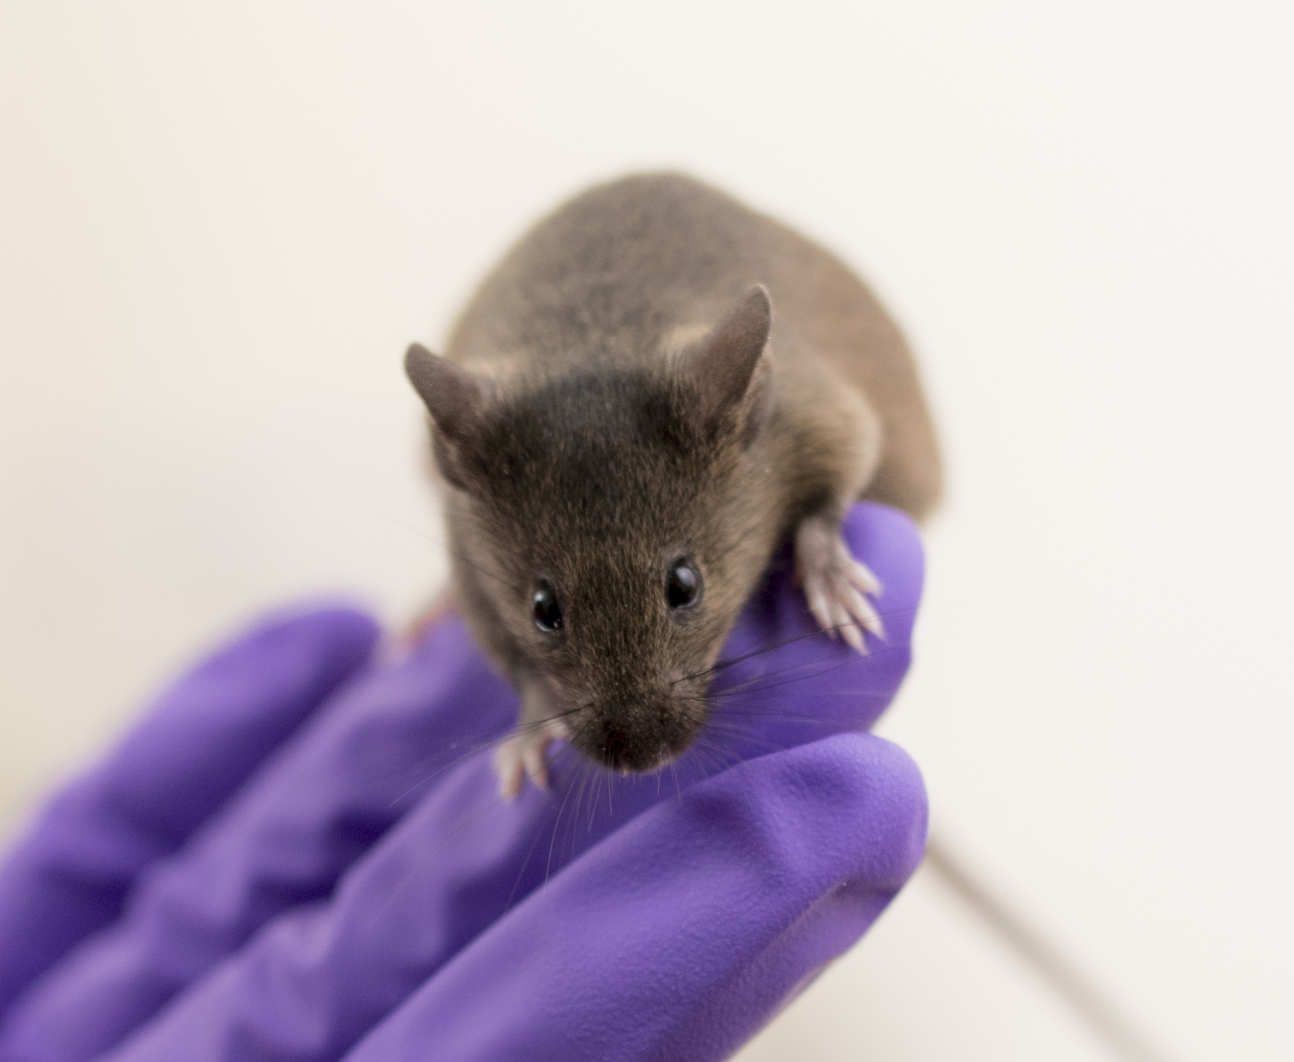 A mouse on a gloved hand